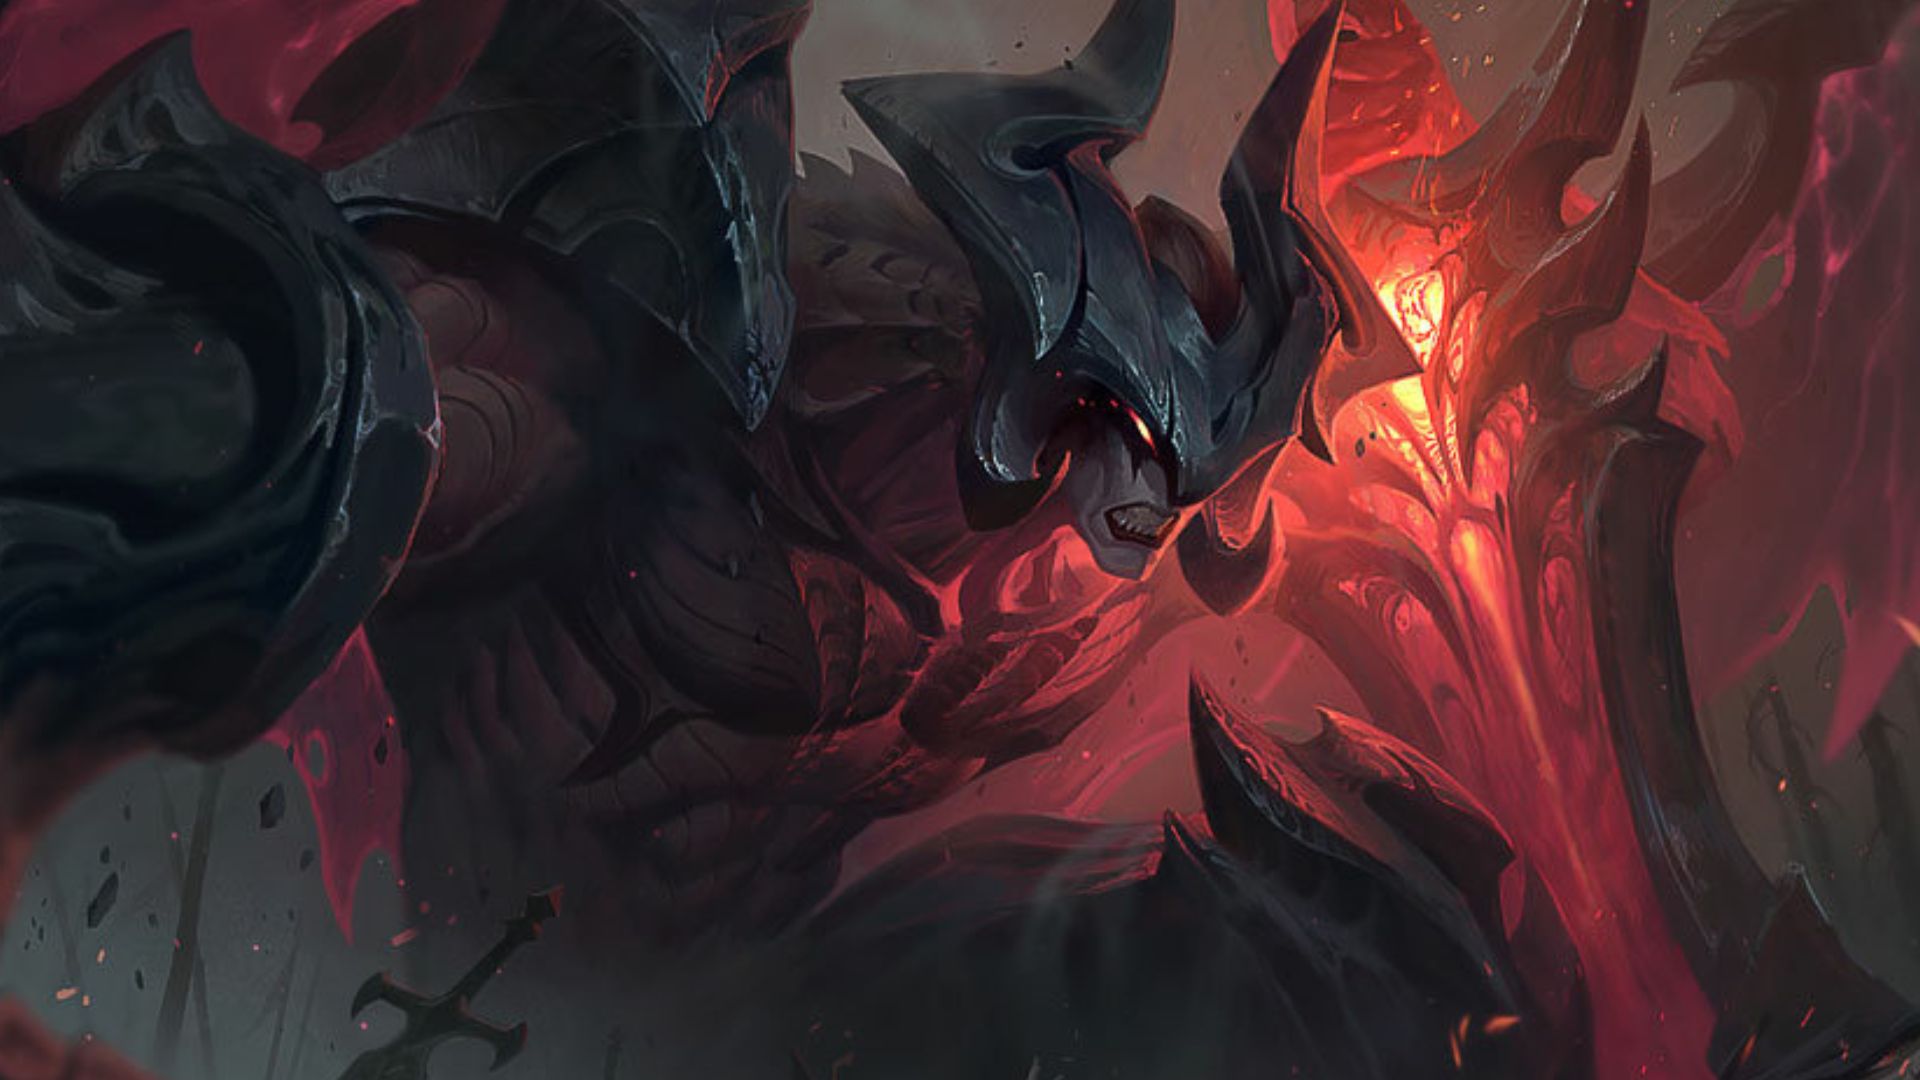 League of Legends patch notes: 13.1 update brings Ranked split changes